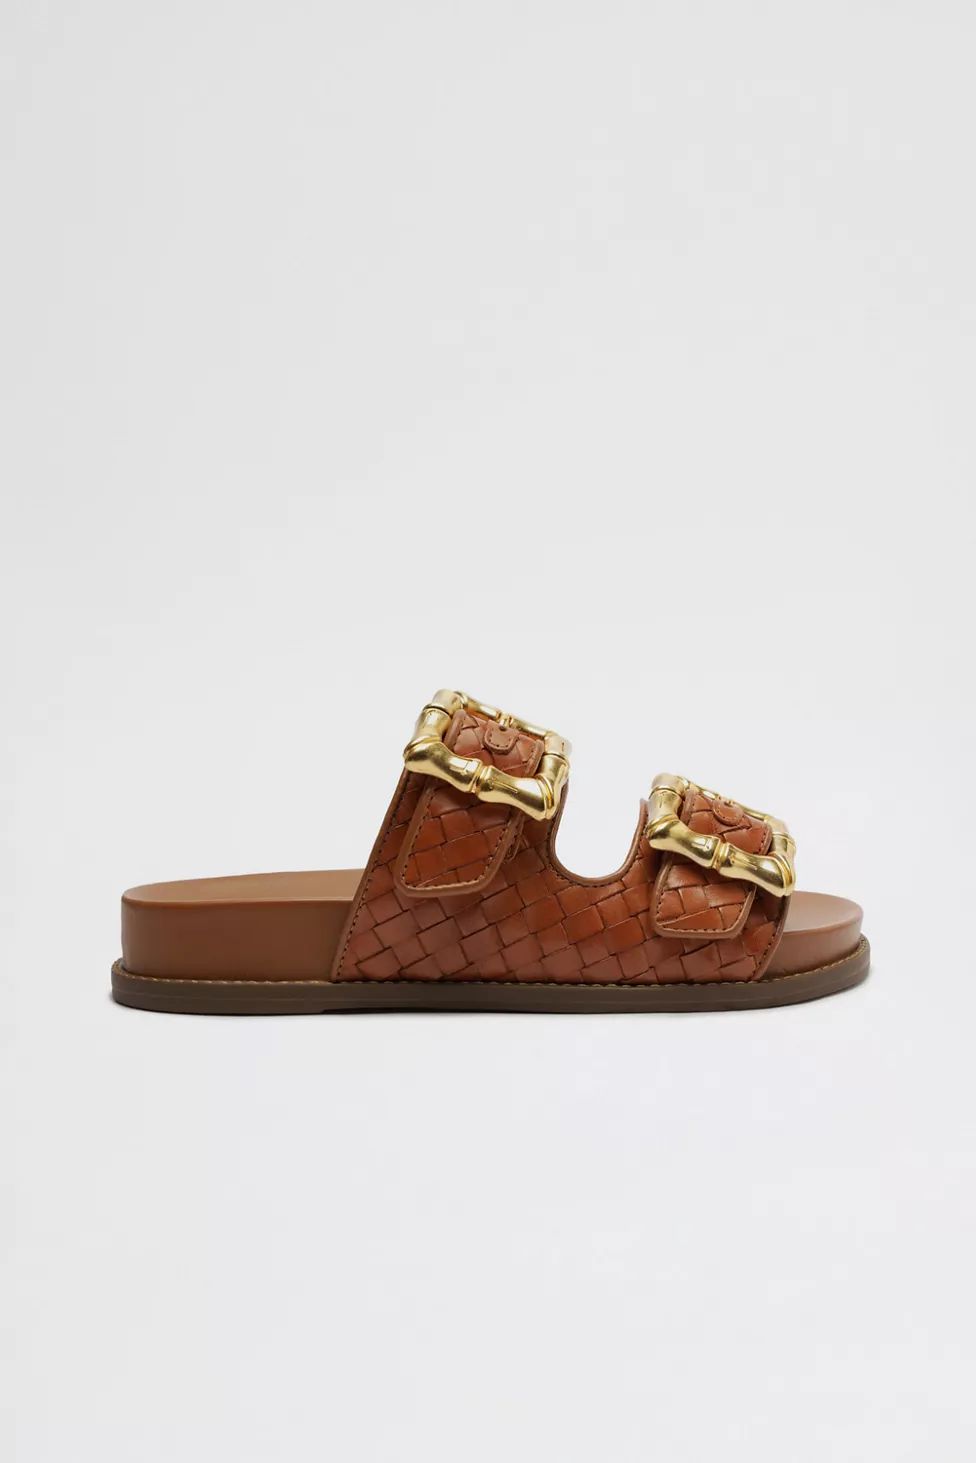 Schutz Enola Woven Leather Buckle Slide | Urban Outfitters (US and RoW)